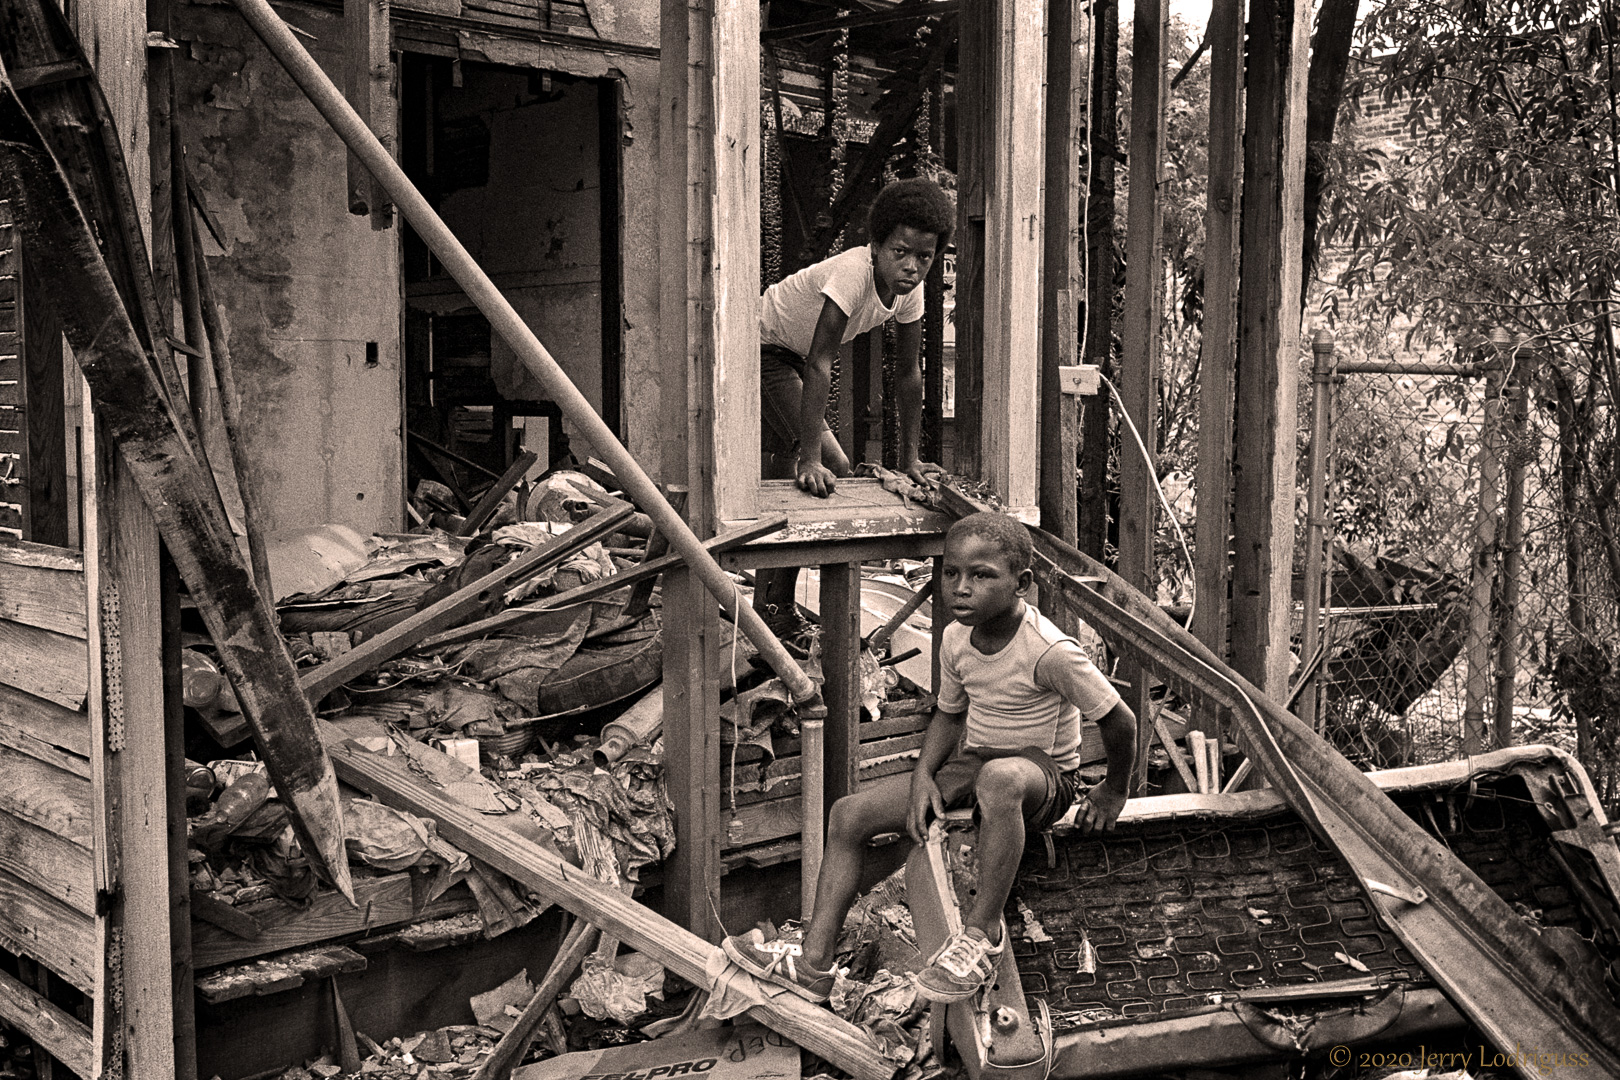 Two children play in the rubble of a burned out house in the 7th ward of New Orleans.